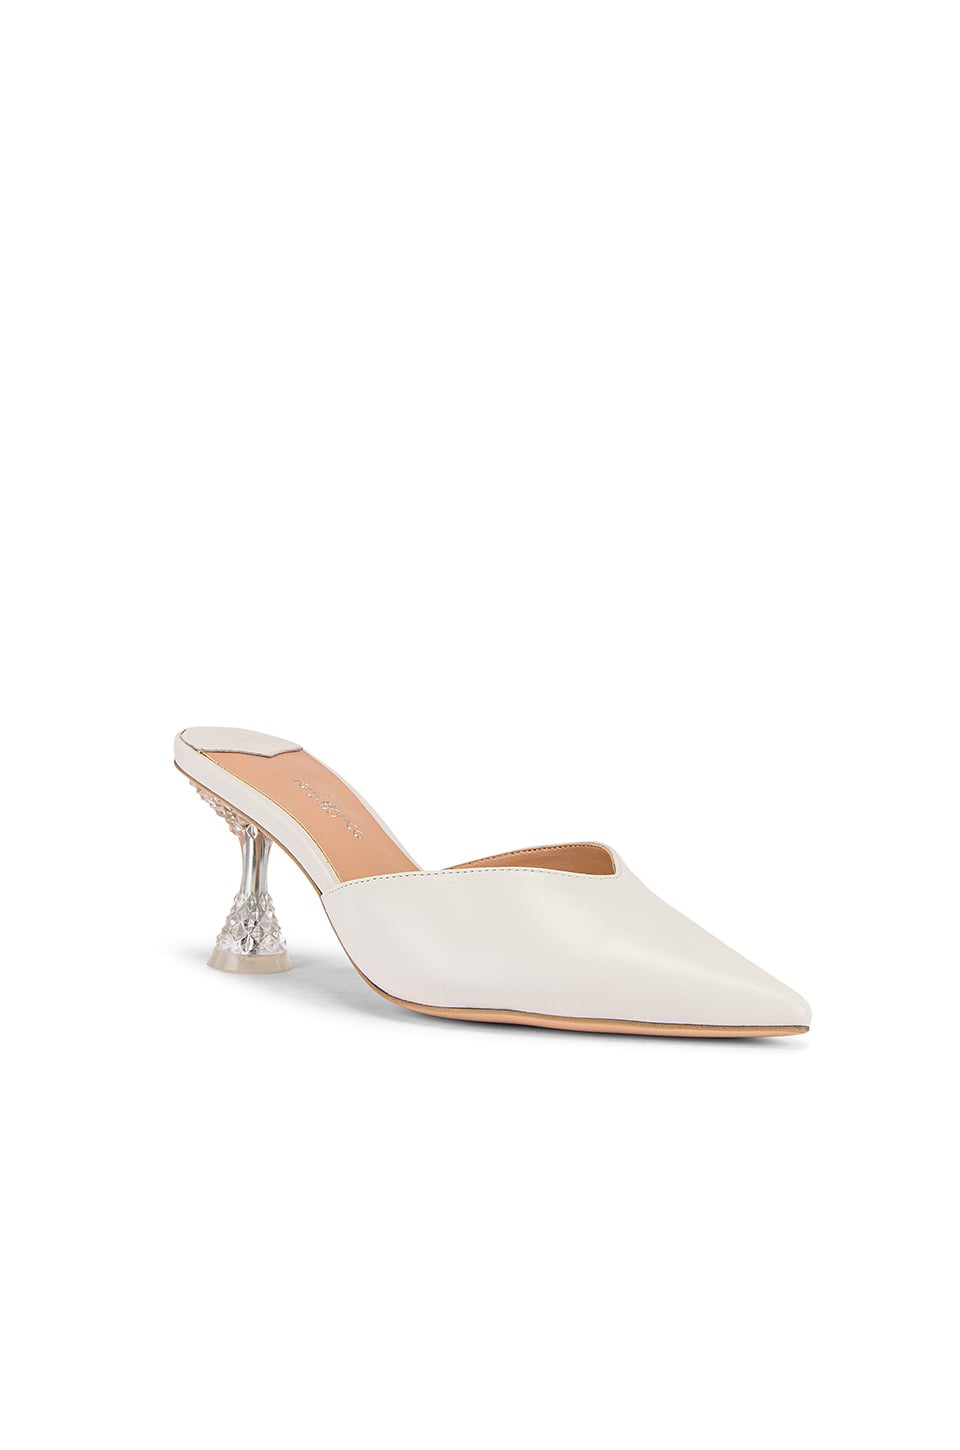 syg bar forbundet Tony Bianco Glimmer Mule in Milk Capretto | 19 Pairs of Shoes I'd Buy at  Revolve in a Heartbeat | POPSUGAR Fashion Photo 15